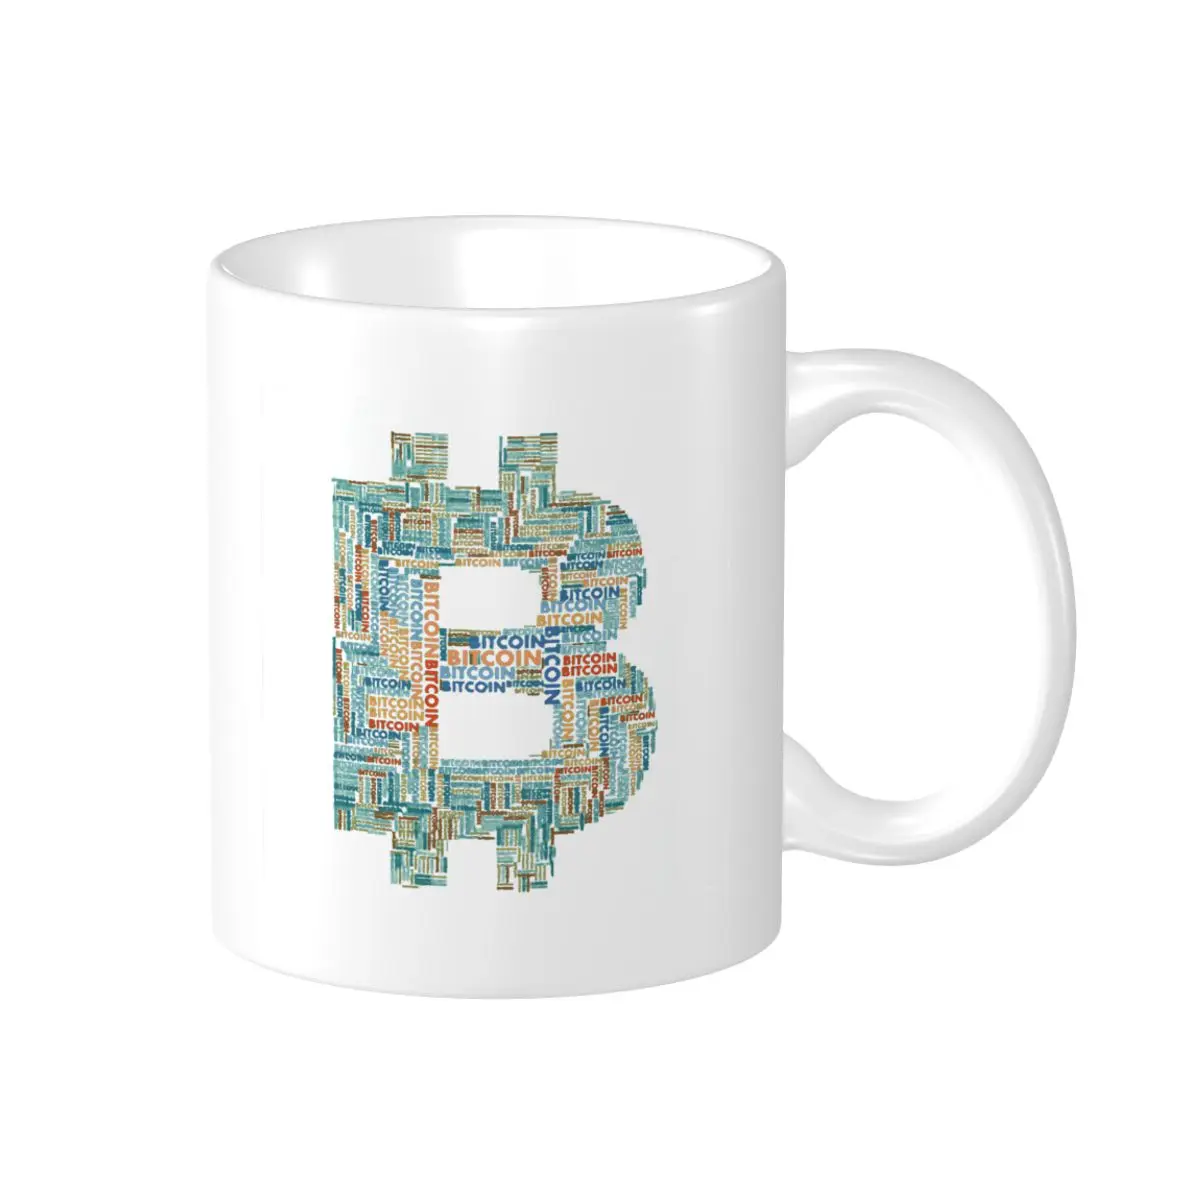 

Promo Bitcoin Vintage Distressed Bitcoin Distressed Mugs Funny Cups CUPS Print Casual Blockchain coffee cups